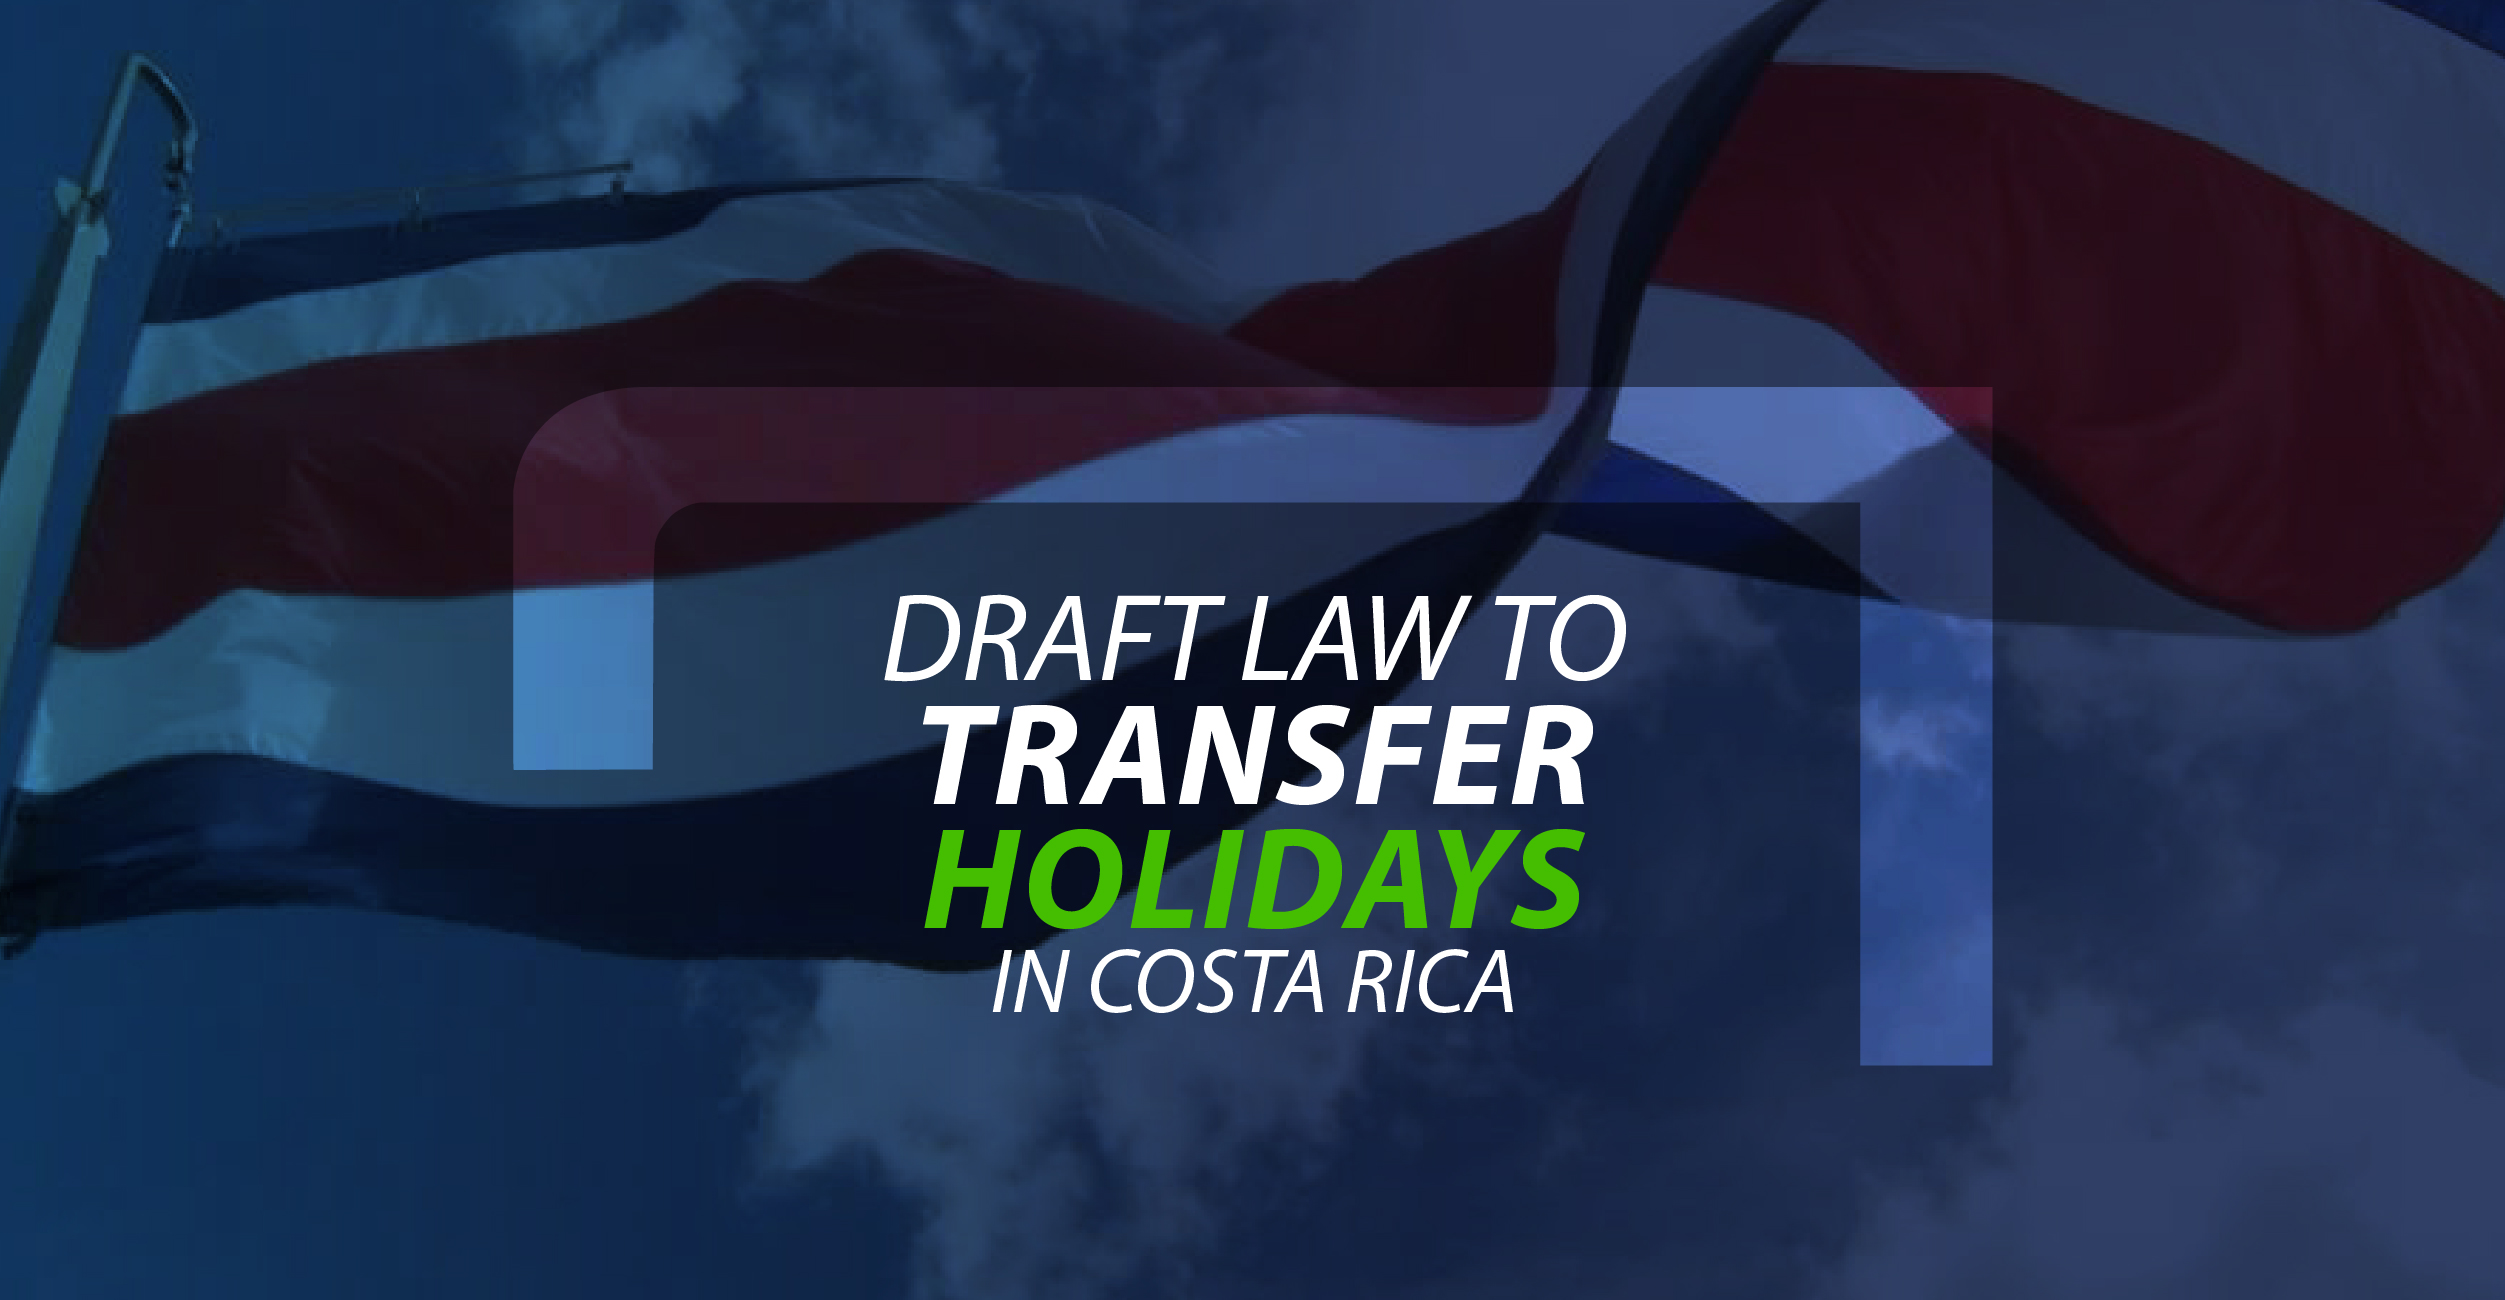 Draft Law to transfer holidays in Costa Rica